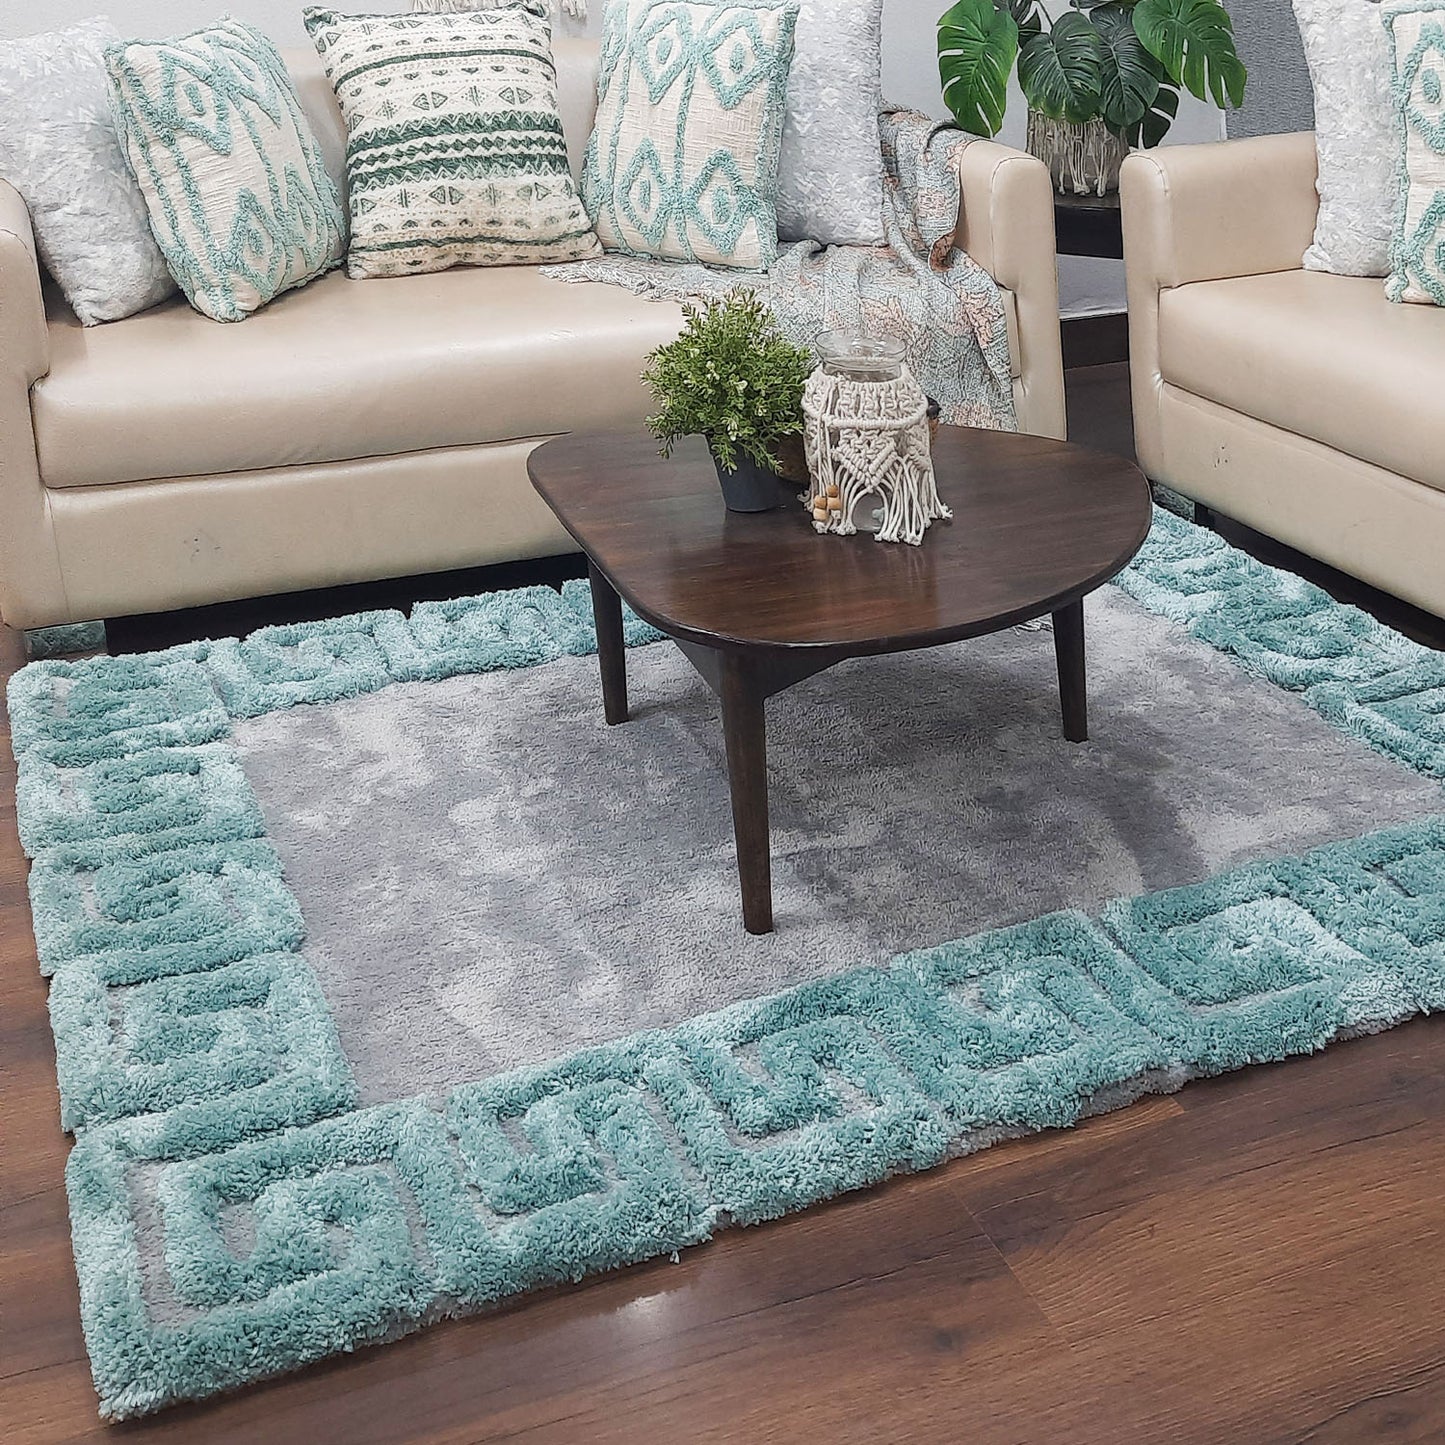 Avioni Atlas Collection- Micro Grey with 3D Aqua Designer Border -Different Sizes Shaggy Fluffy Rugs and Carpet for Living Room